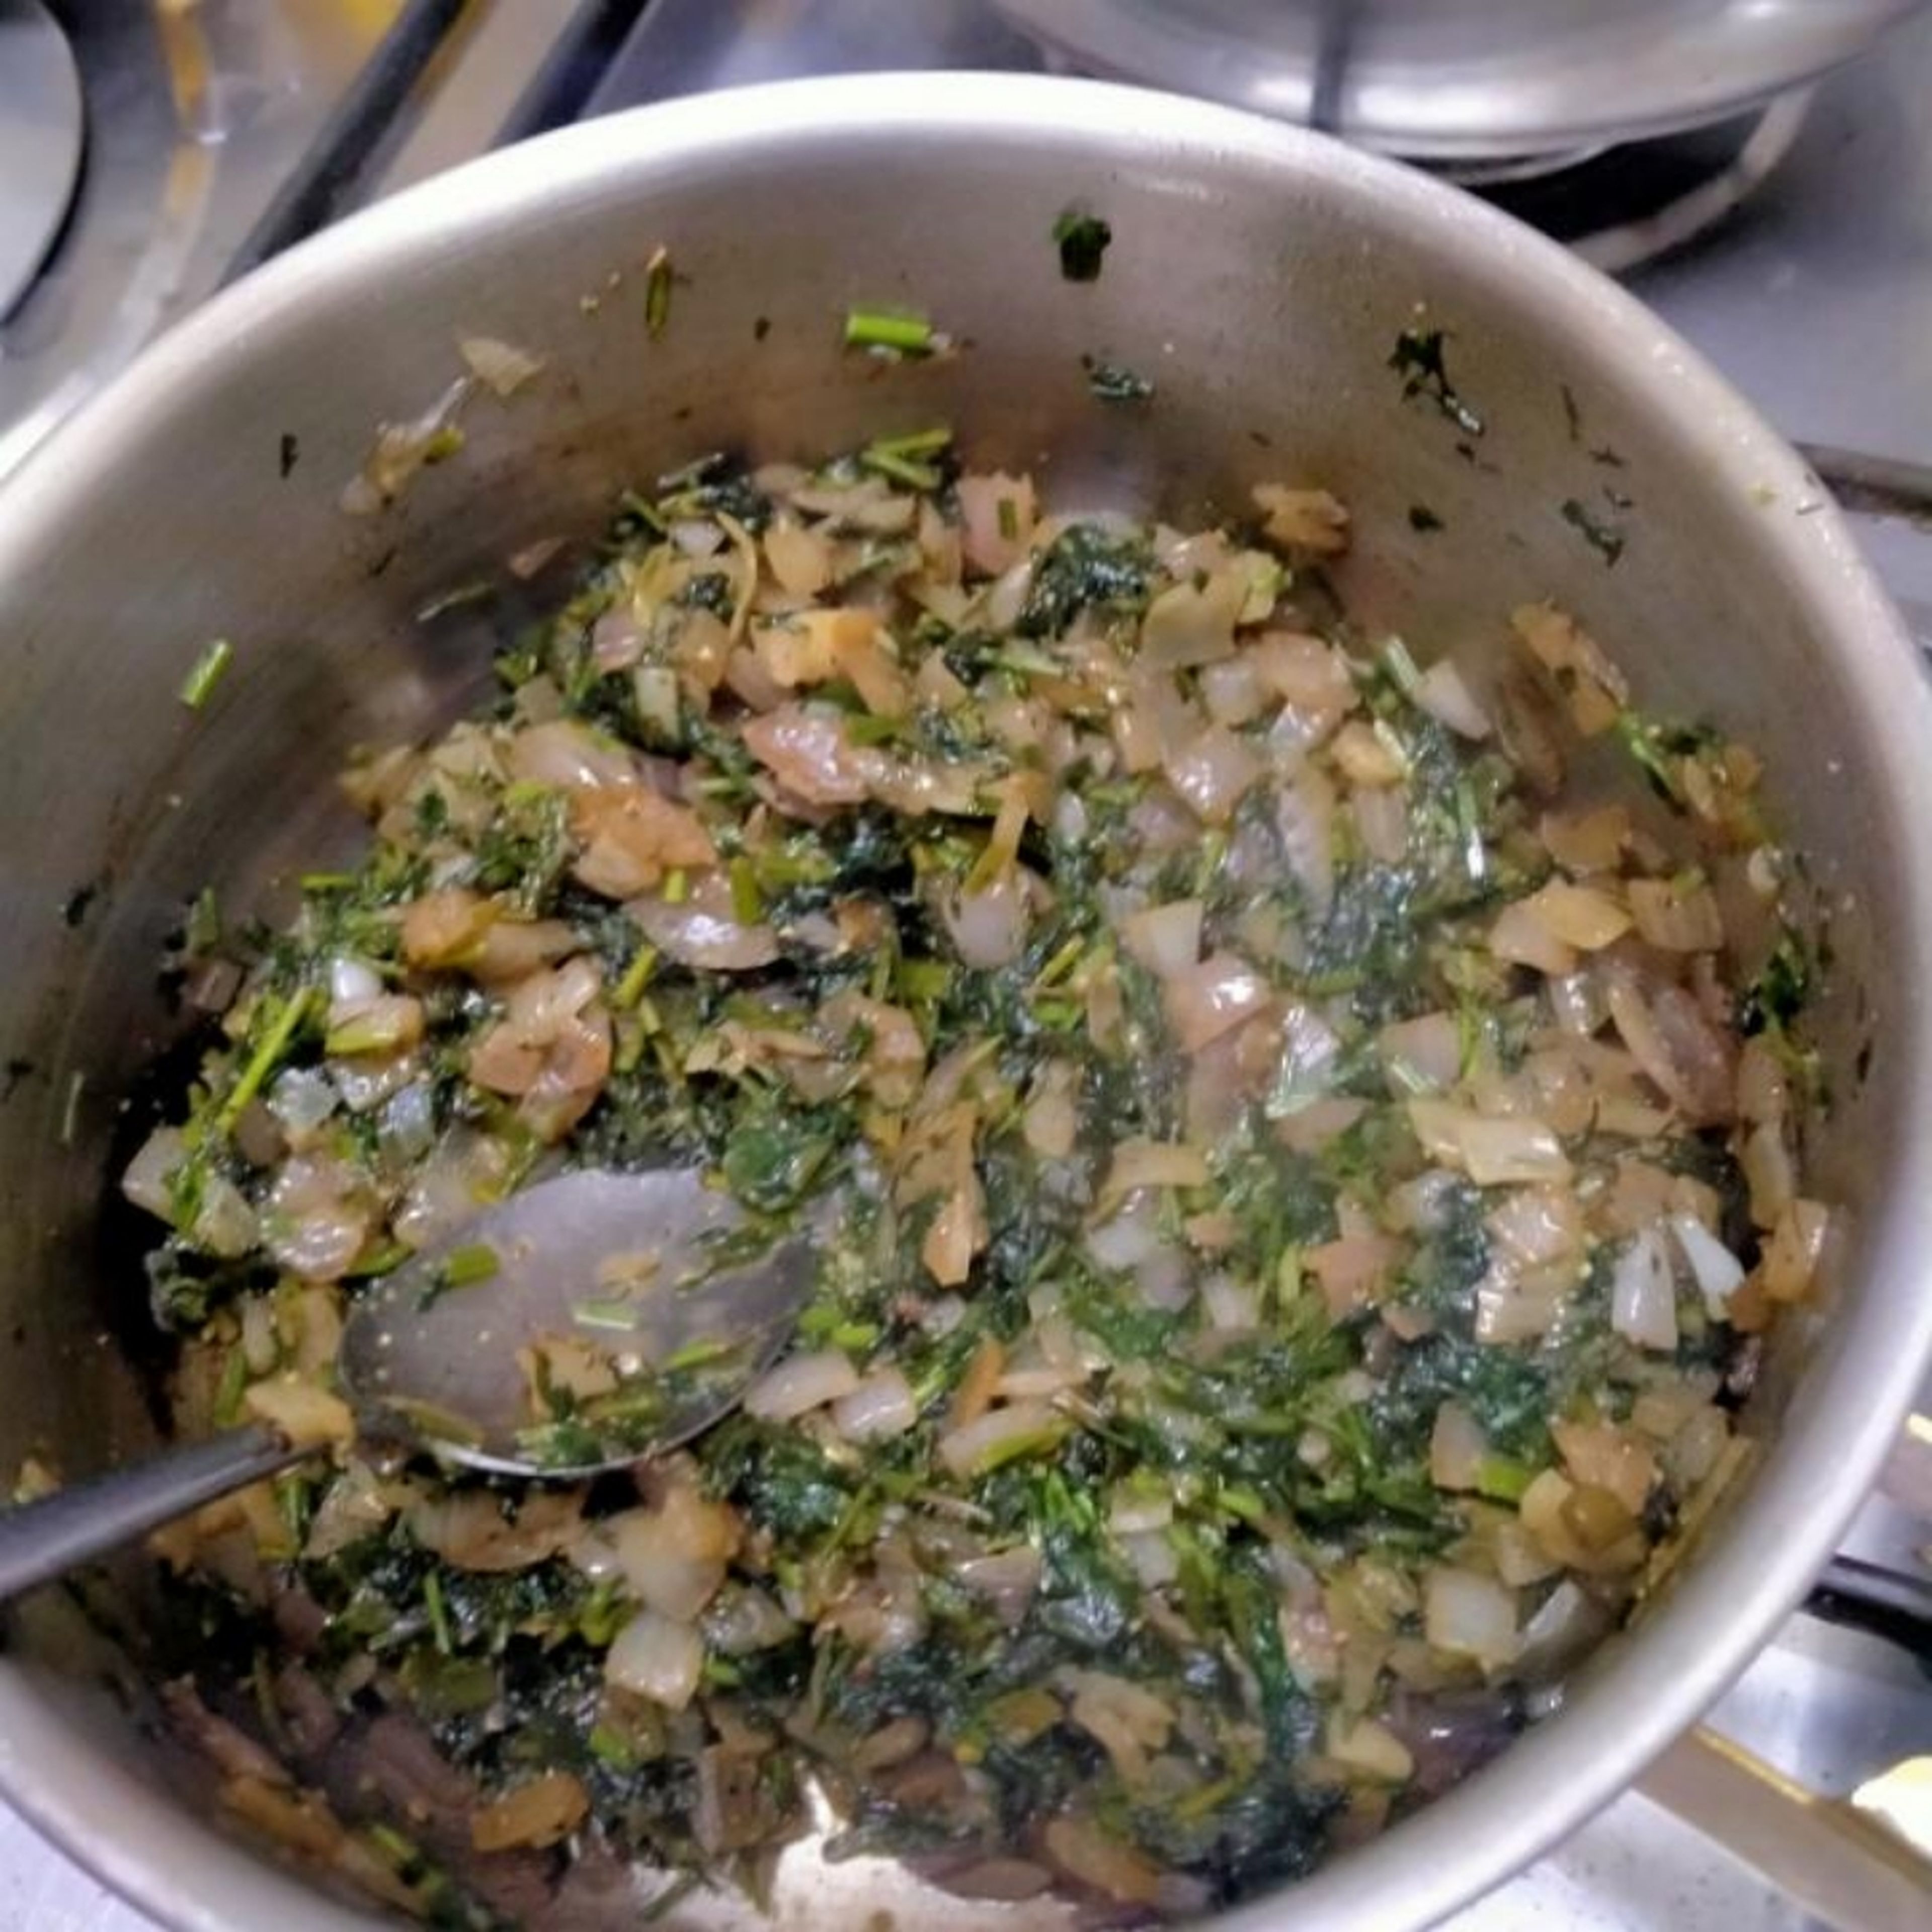 add chopped parsley, dill and cilantro one cup each and cook for about 2-3 minutes until reduced in volume then add ground coriander, black pepper, chilli flakes and salt 1 tsp each stir it for another minute and set a side and let it cool for 10 minutes. keep in mind you could add more salt later as you like